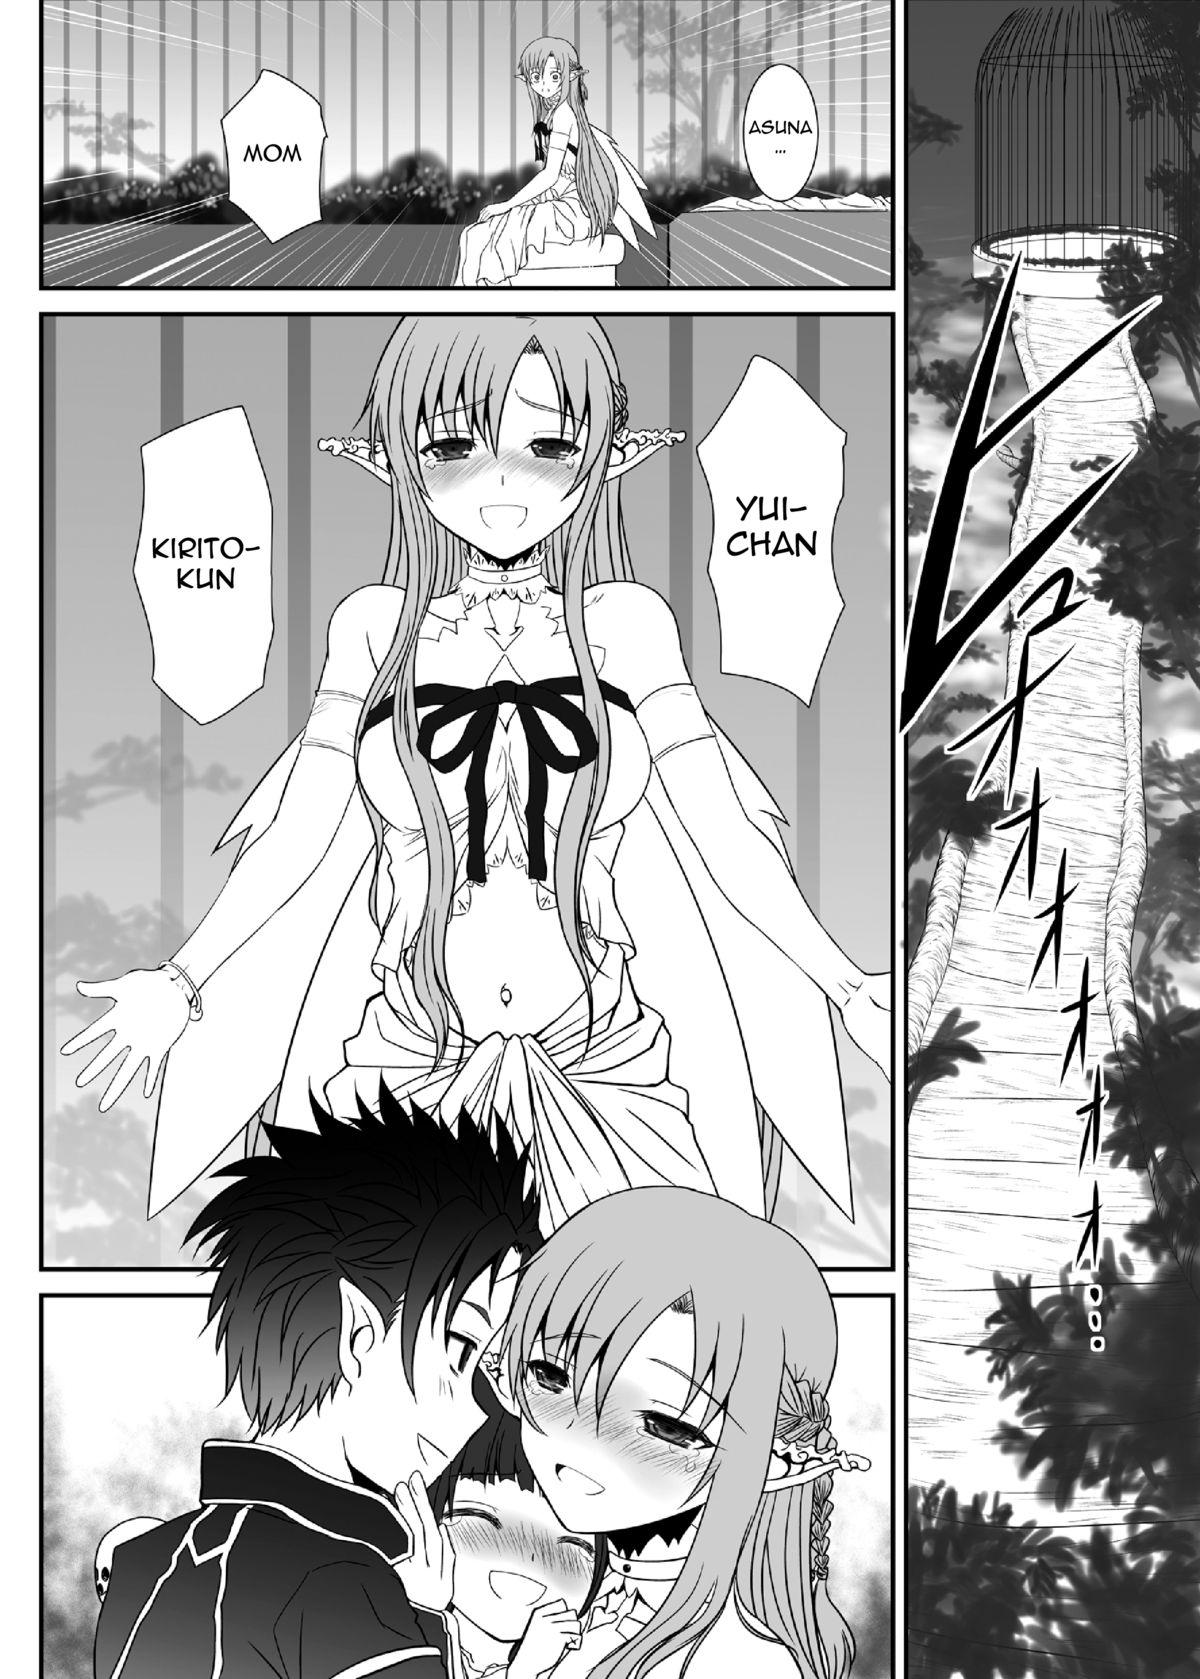 Awesome Slave Asuna On-Demand 2 - Sword art online Dick Suckers - Page 5